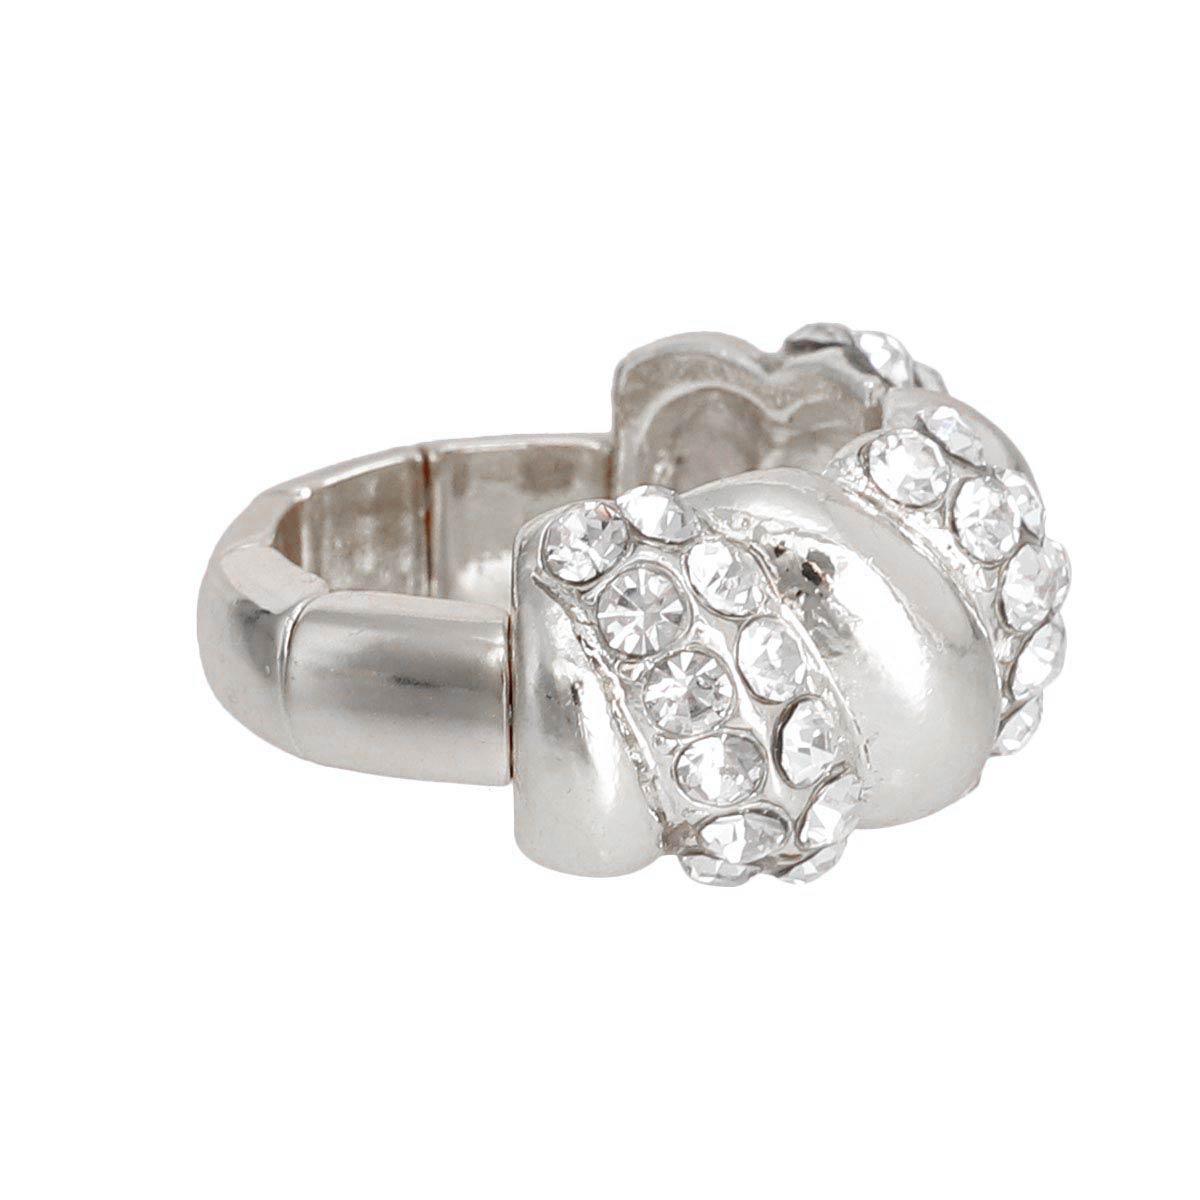 Eye-catching Silver-tone Women's Ring to Sparkle and Swirl